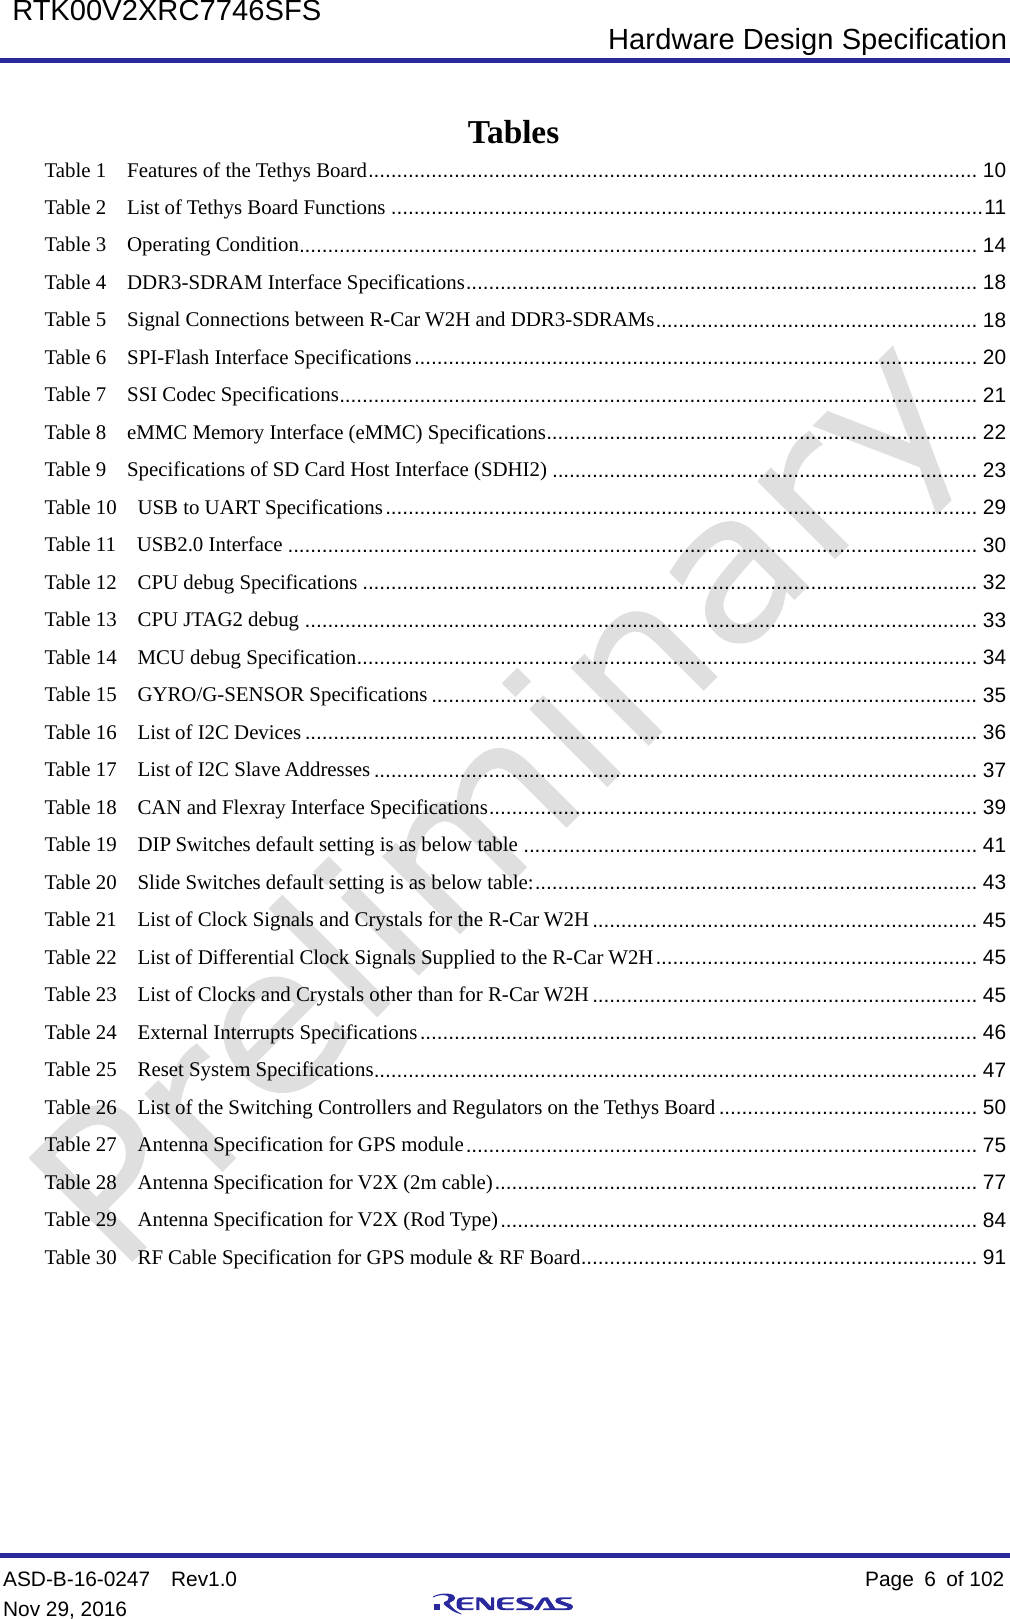  Hardware Design Specification ASD-B-16-0247  Rev1.0    Page  6  of 102 Nov 29, 2016     RTK00V2XRC7746SFS    Tables Table 1  Features of the Tethys Board   .......................................................................................................... 10Table 2  List of Tethys Board Functions   ....................................................................................................... 11Table 3  Operating Condition  ...................................................................................................................... 14Table 4  DDR3-SDRAM Interface Specifications   ......................................................................................... 18Table 5  Signal Connections between R-Car W2H and DDR3-SDRAMs   ........................................................ 18Table 6  SPI-Flash Interface Specifications   .................................................................................................. 20Table 7  SSI Codec Specifications   ............................................................................................................... 21Table 8  eMMC Memory Interface (eMMC) Specifications   ........................................................................... 22Table 9  Specifications of SD Card Host Interface (SDHI2)   .......................................................................... 23Table 10  USB to UART Specifications   ....................................................................................................... 29Table 11  USB2.0 Interface   ........................................................................................................................ 30Table 12  CPU debug Specifications   ........................................................................................................... 32Table 13  CPU JTAG2 debug   ..................................................................................................................... 33Table 14  MCU debug Specification   ............................................................................................................ 34Table 15  GYRO/G-SENSOR Specifications   ............................................................................................... 35Table 16  List of I2C Devices   ..................................................................................................................... 36Table 17  List of I2C Slave Addresses   ......................................................................................................... 37Table 18  CAN and Flexray Interface Specifications   ..................................................................................... 39Table 19  DIP Switches default setting is as below table   ............................................................................... 41Table 20  Slide Switches default setting is as below table:   ............................................................................. 43Table 21  List of Clock Signals and Crystals for the R-Car W2H   ................................................................... 45Table 22  List of Differential Clock Signals Supplied to the R-Car W2H   ........................................................ 45Table 23  List of Clocks and Crystals other than for R-Car W2H   ................................................................... 45Table 24  External Interrupts Specifications   ................................................................................................. 46Table 25  Reset System Specifications   ......................................................................................................... 47Table 26  List of the Switching Controllers and Regulators on the Tethys Board   ............................................. 50Table 27  Antenna Specification for GPS module   ......................................................................................... 75Table 28  Antenna Specification for V2X (2m cable)   .................................................................................... 77Table 29  Antenna Specification for V2X (Rod Type)   ................................................................................... 84Table 30  RF Cable Specification for GPS module &amp; RF Board   ..................................................................... 91      